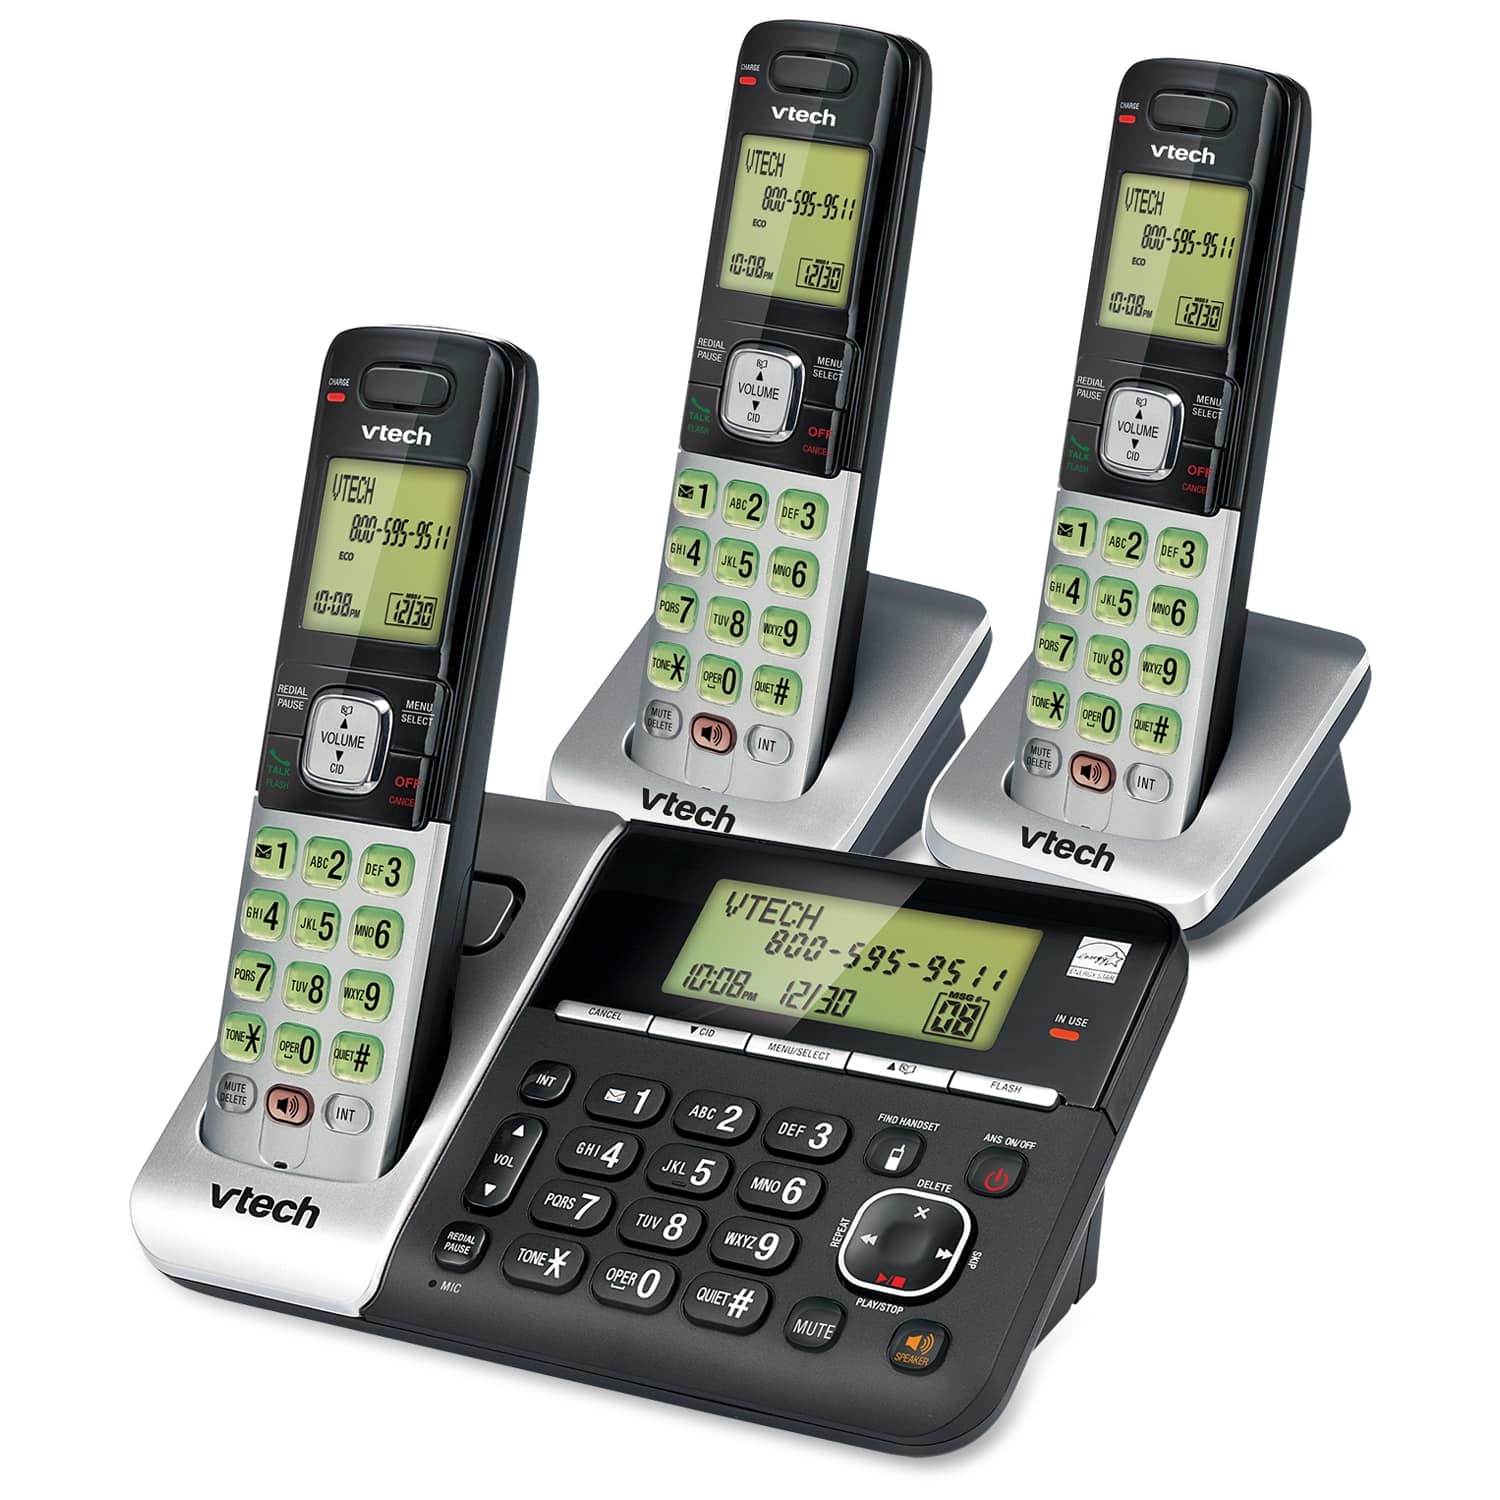 3 Handset Answering System with Dual Caller ID/Call Waiting - view 2